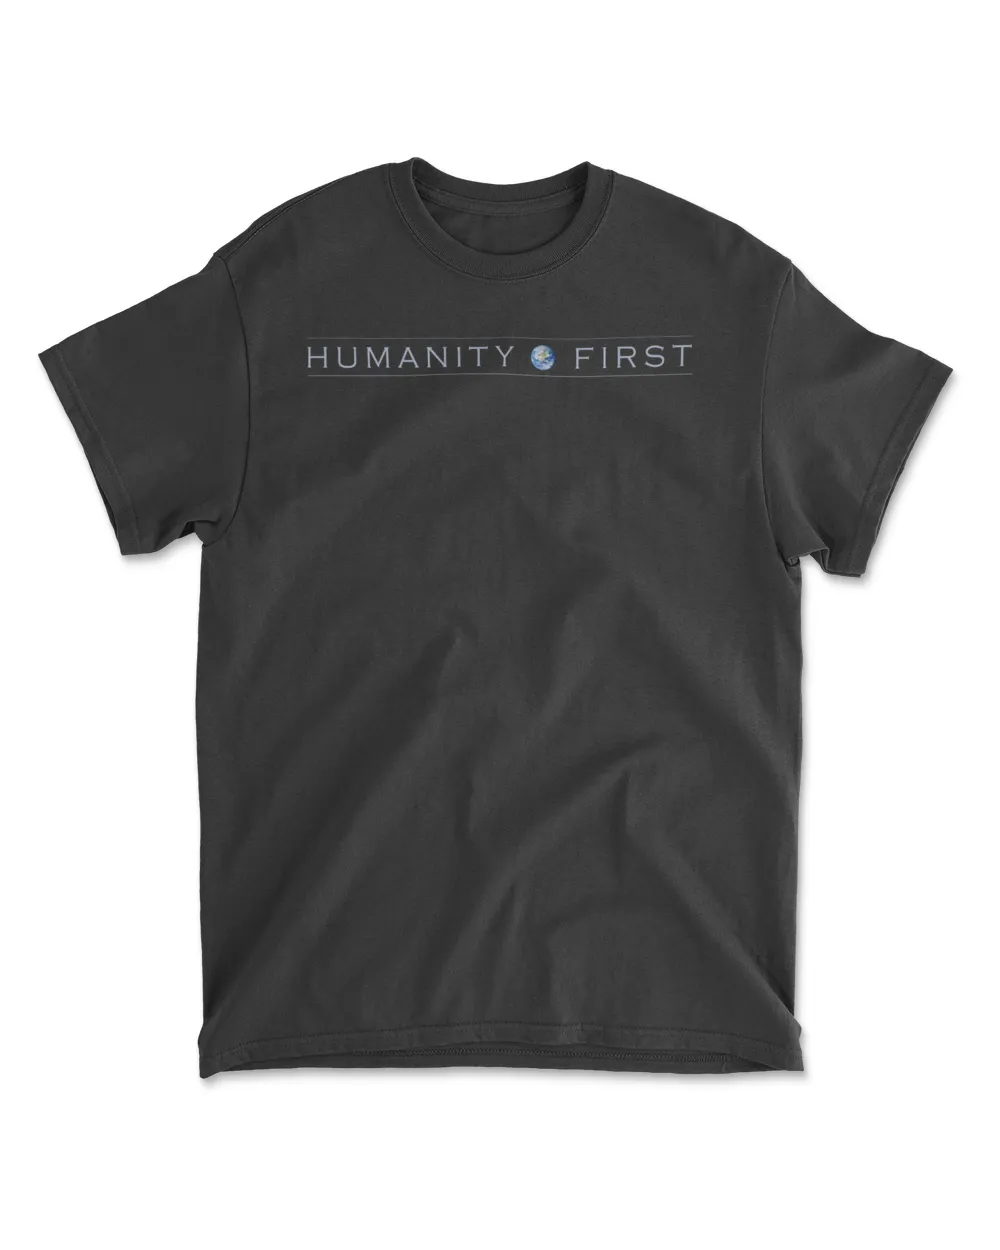 Humanity First T-Shirt